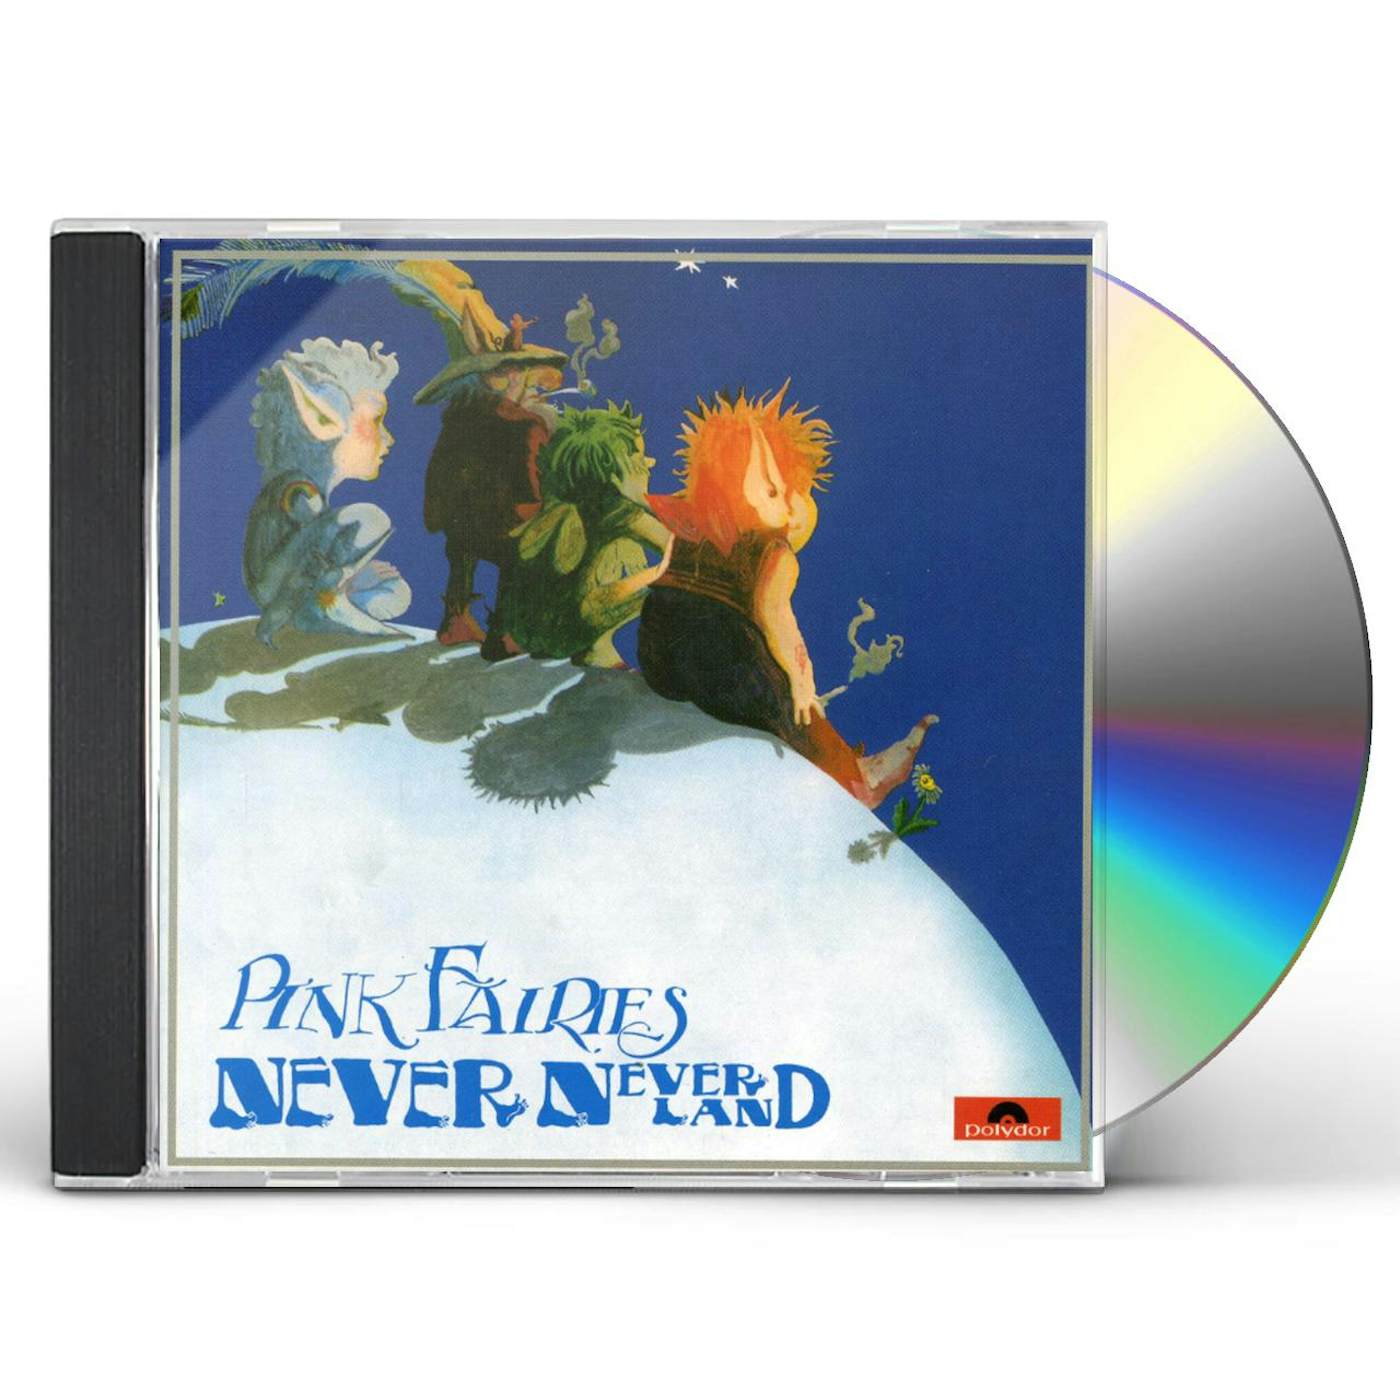 The Pink Fairies NEVERNEVERLAND CD